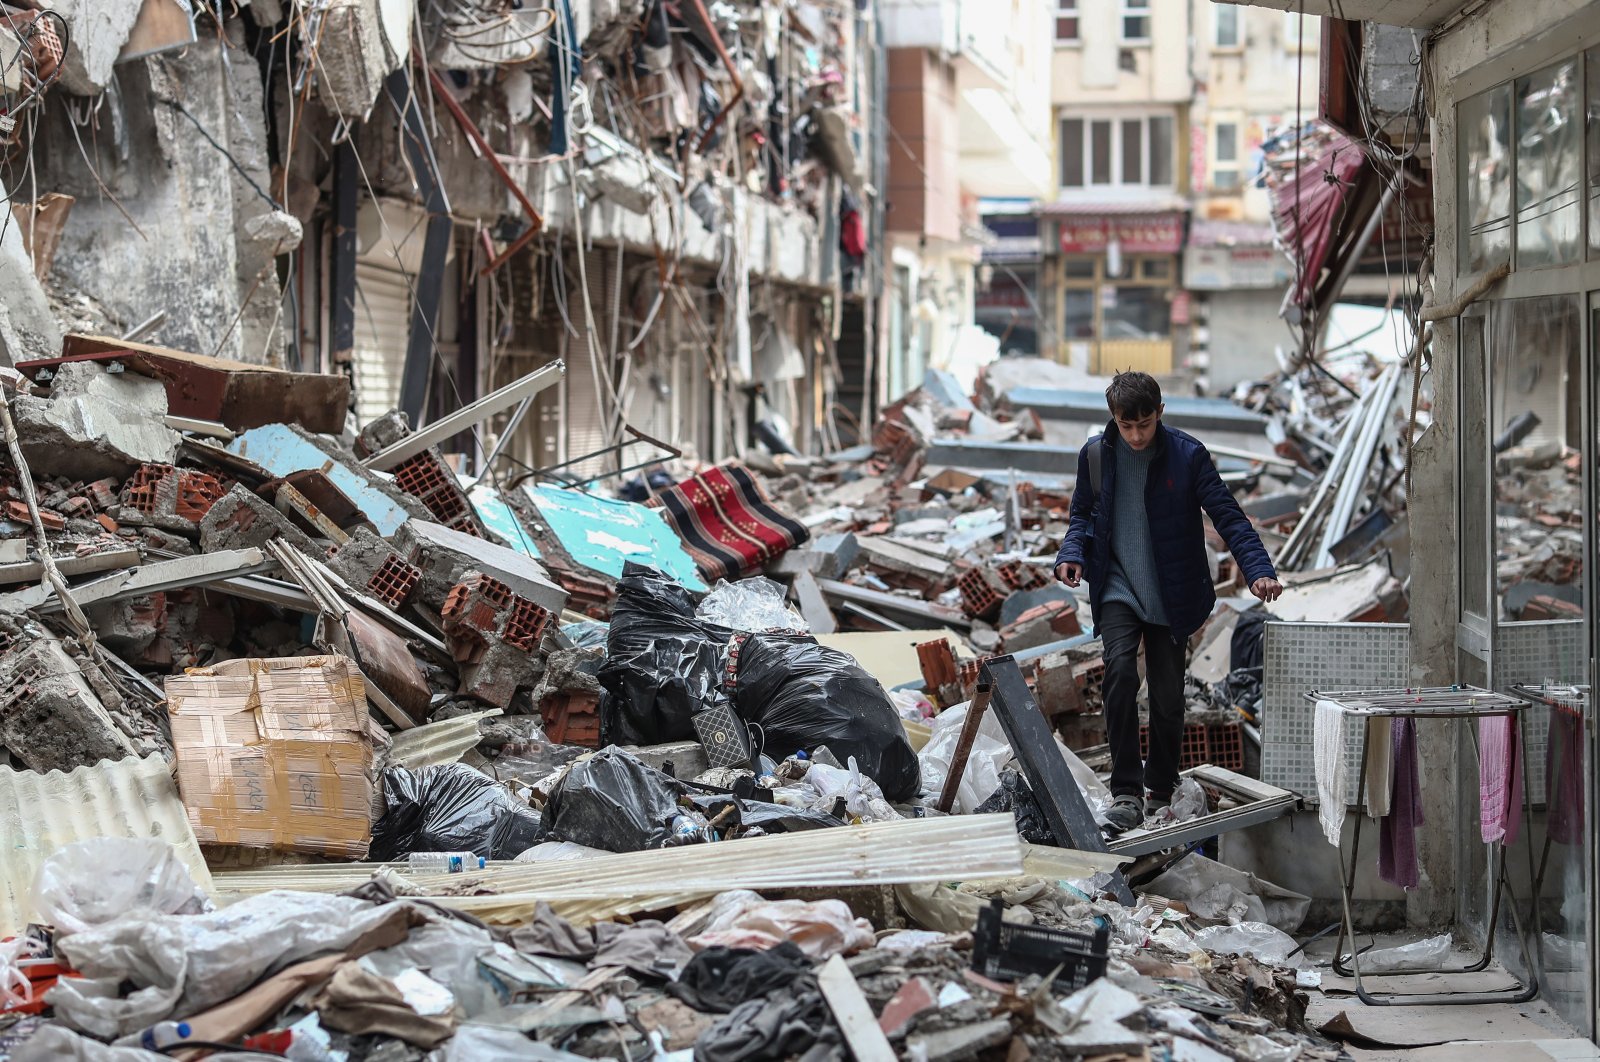 A boy walks among the ruble of collapsed buildings on the eve of Ramadan, in the aftermath of the powerful earthquakes in Kahramanmaraş, Türkiye, March 22, 2023. (EPA Photo)